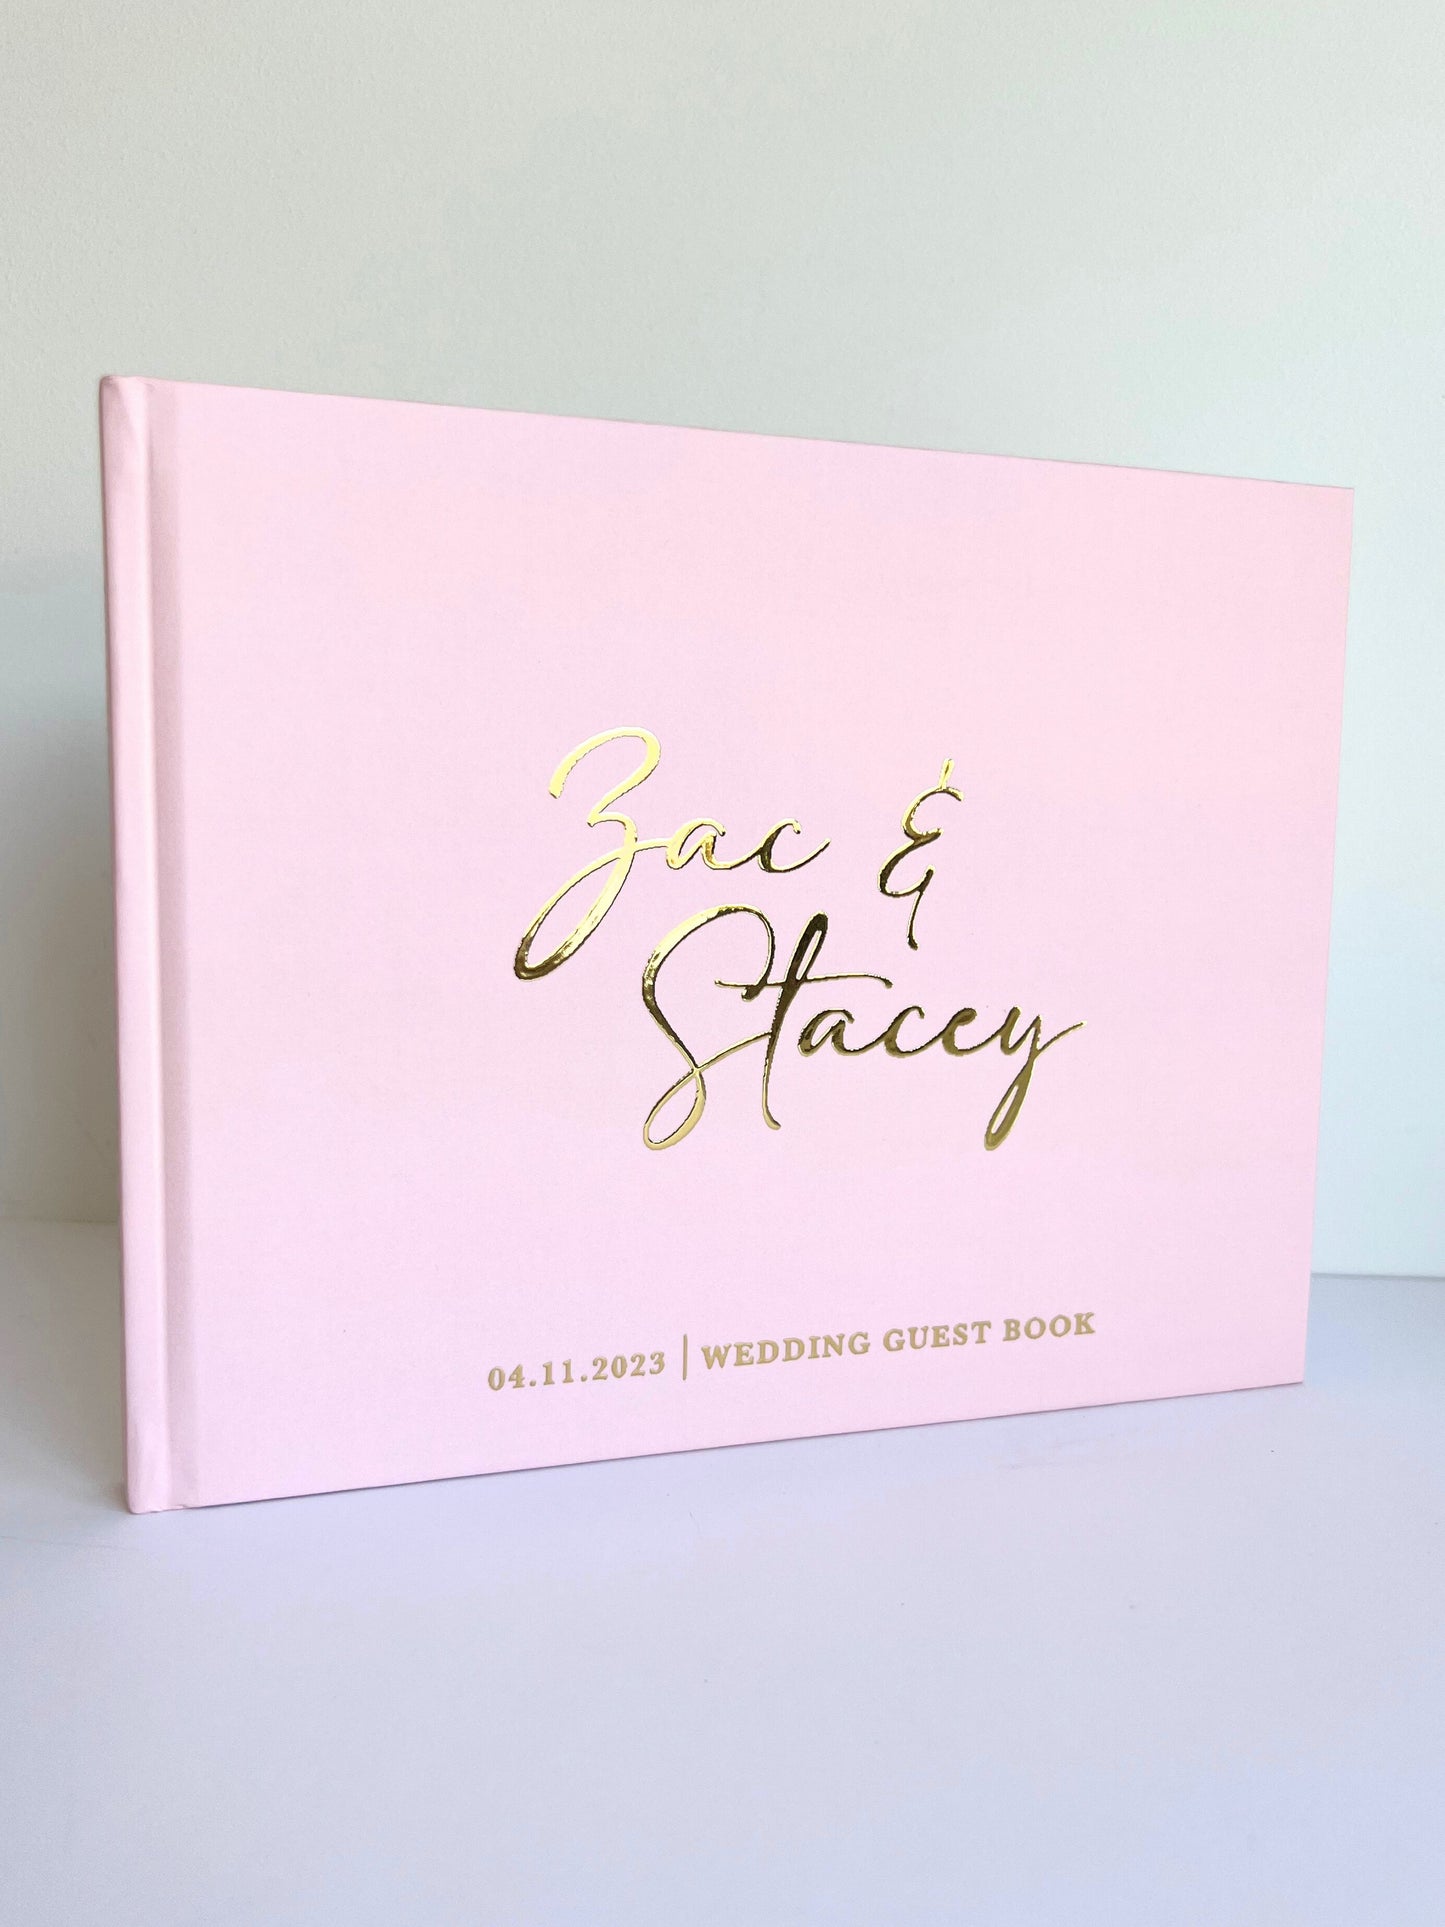 Stacey Guest Book